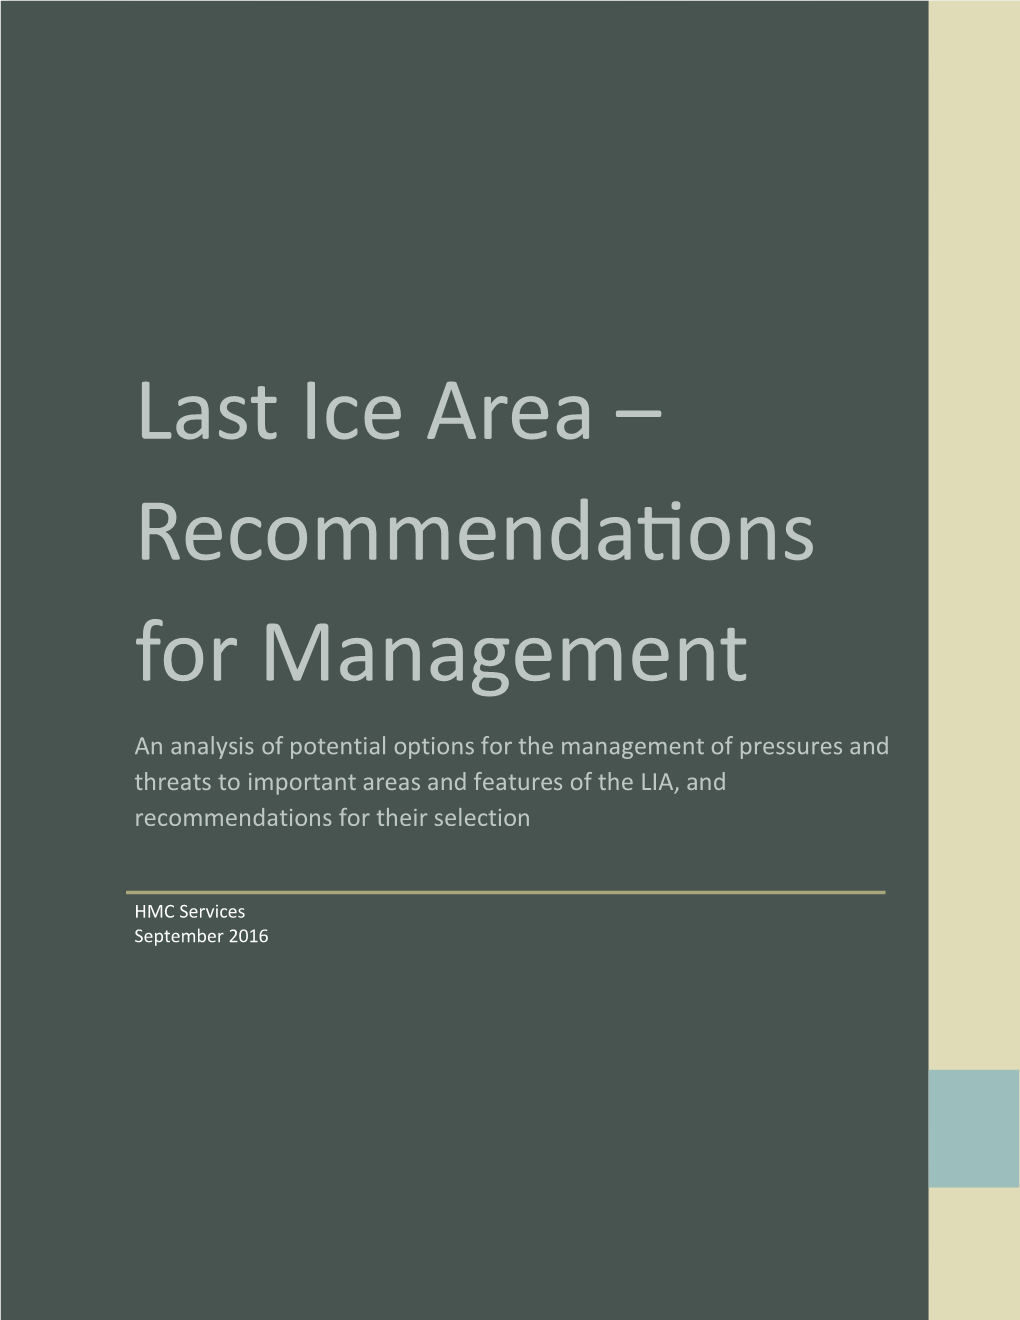 Last Ice Area – Recommendations for Management